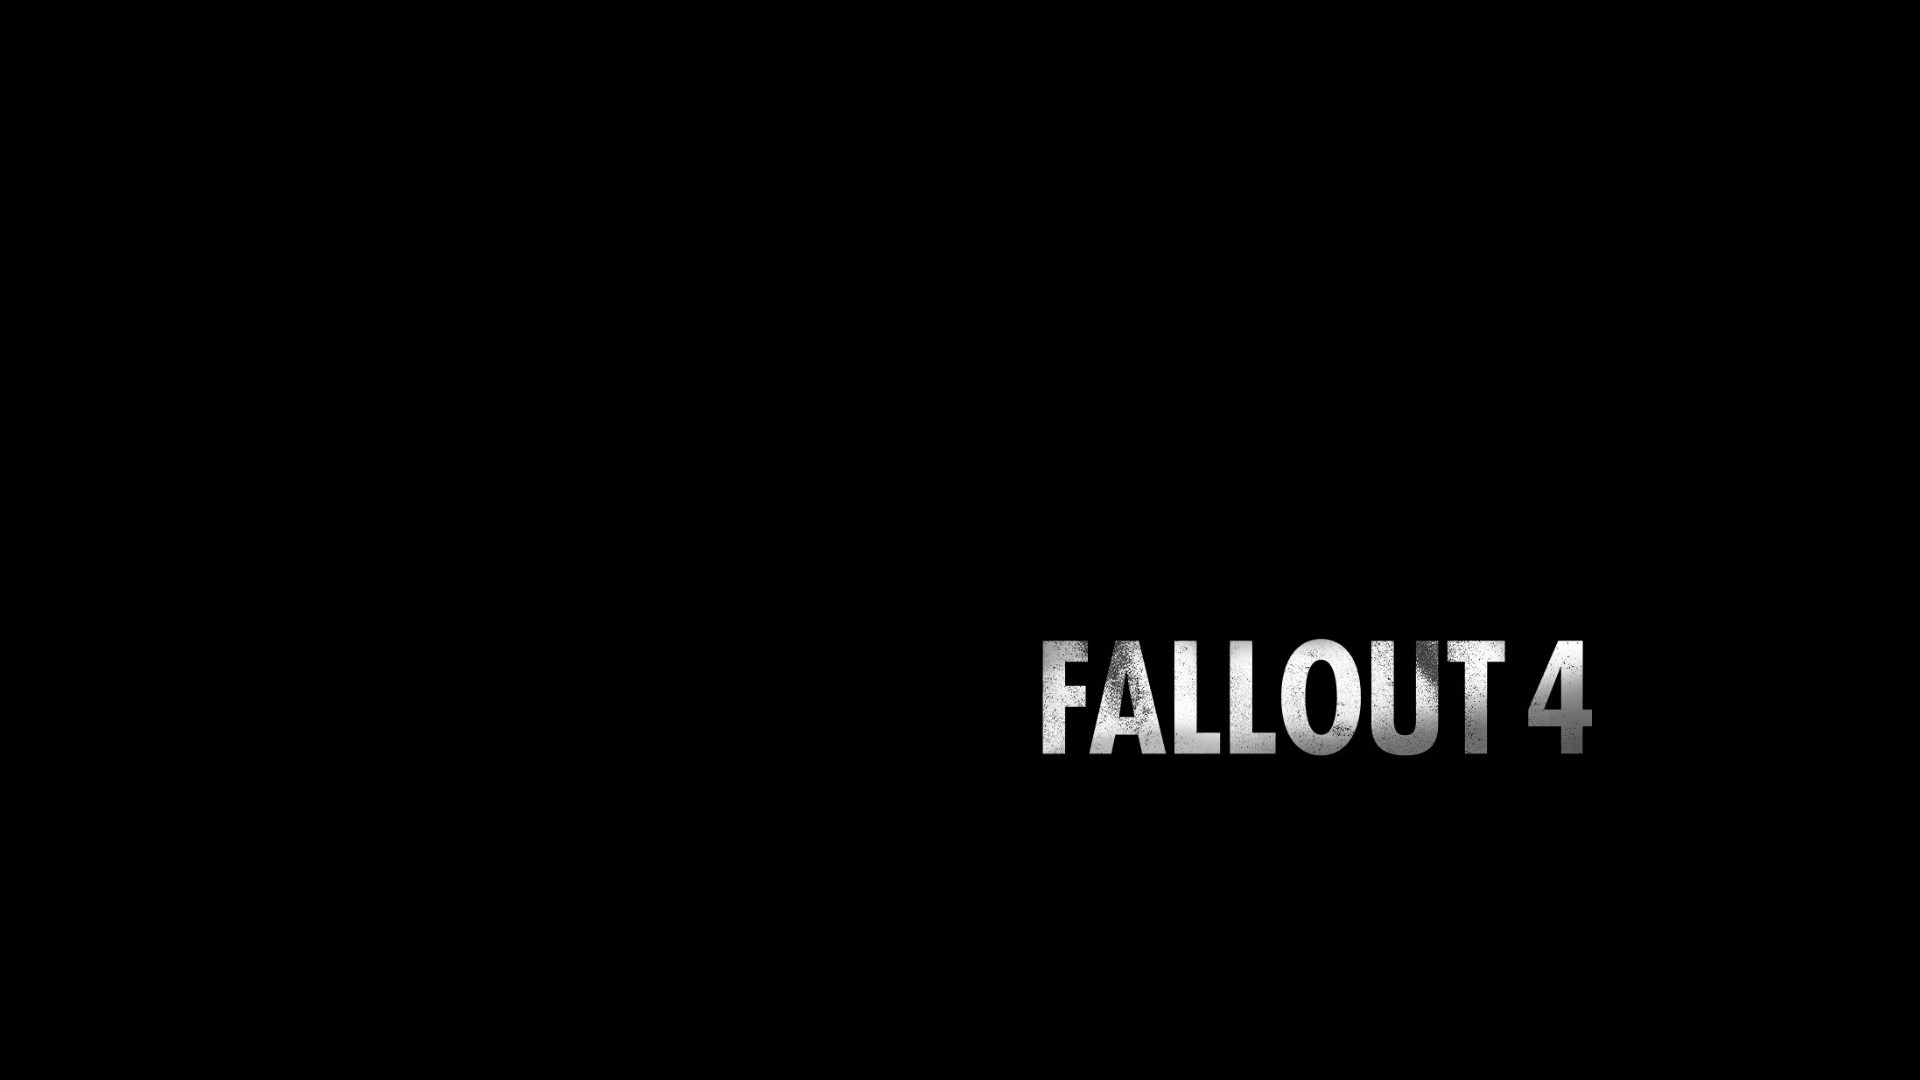 Fallout 4, Fallout, Typography, Black Background Wallpaper